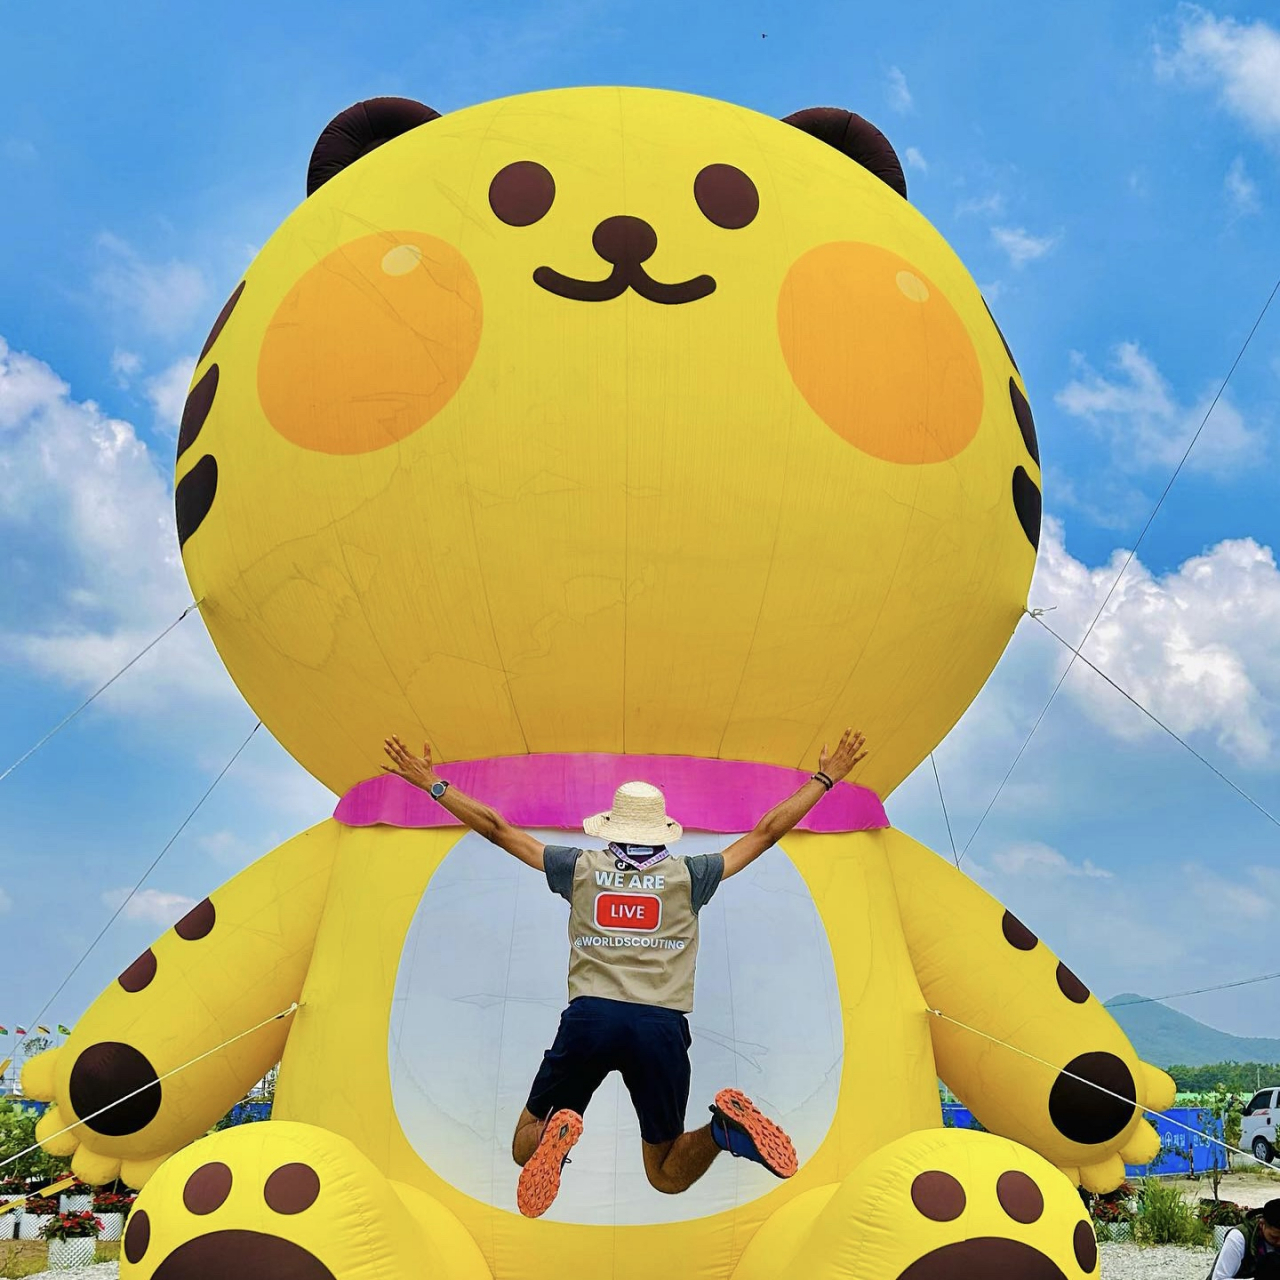 Yassine Gandouz, an International Service Team volunteer from Tunisia, jumps for a photo in front of the 2023 World Scout Jamboree mascot, Saebeomi. (Courtesy of Yassine Gandouz)